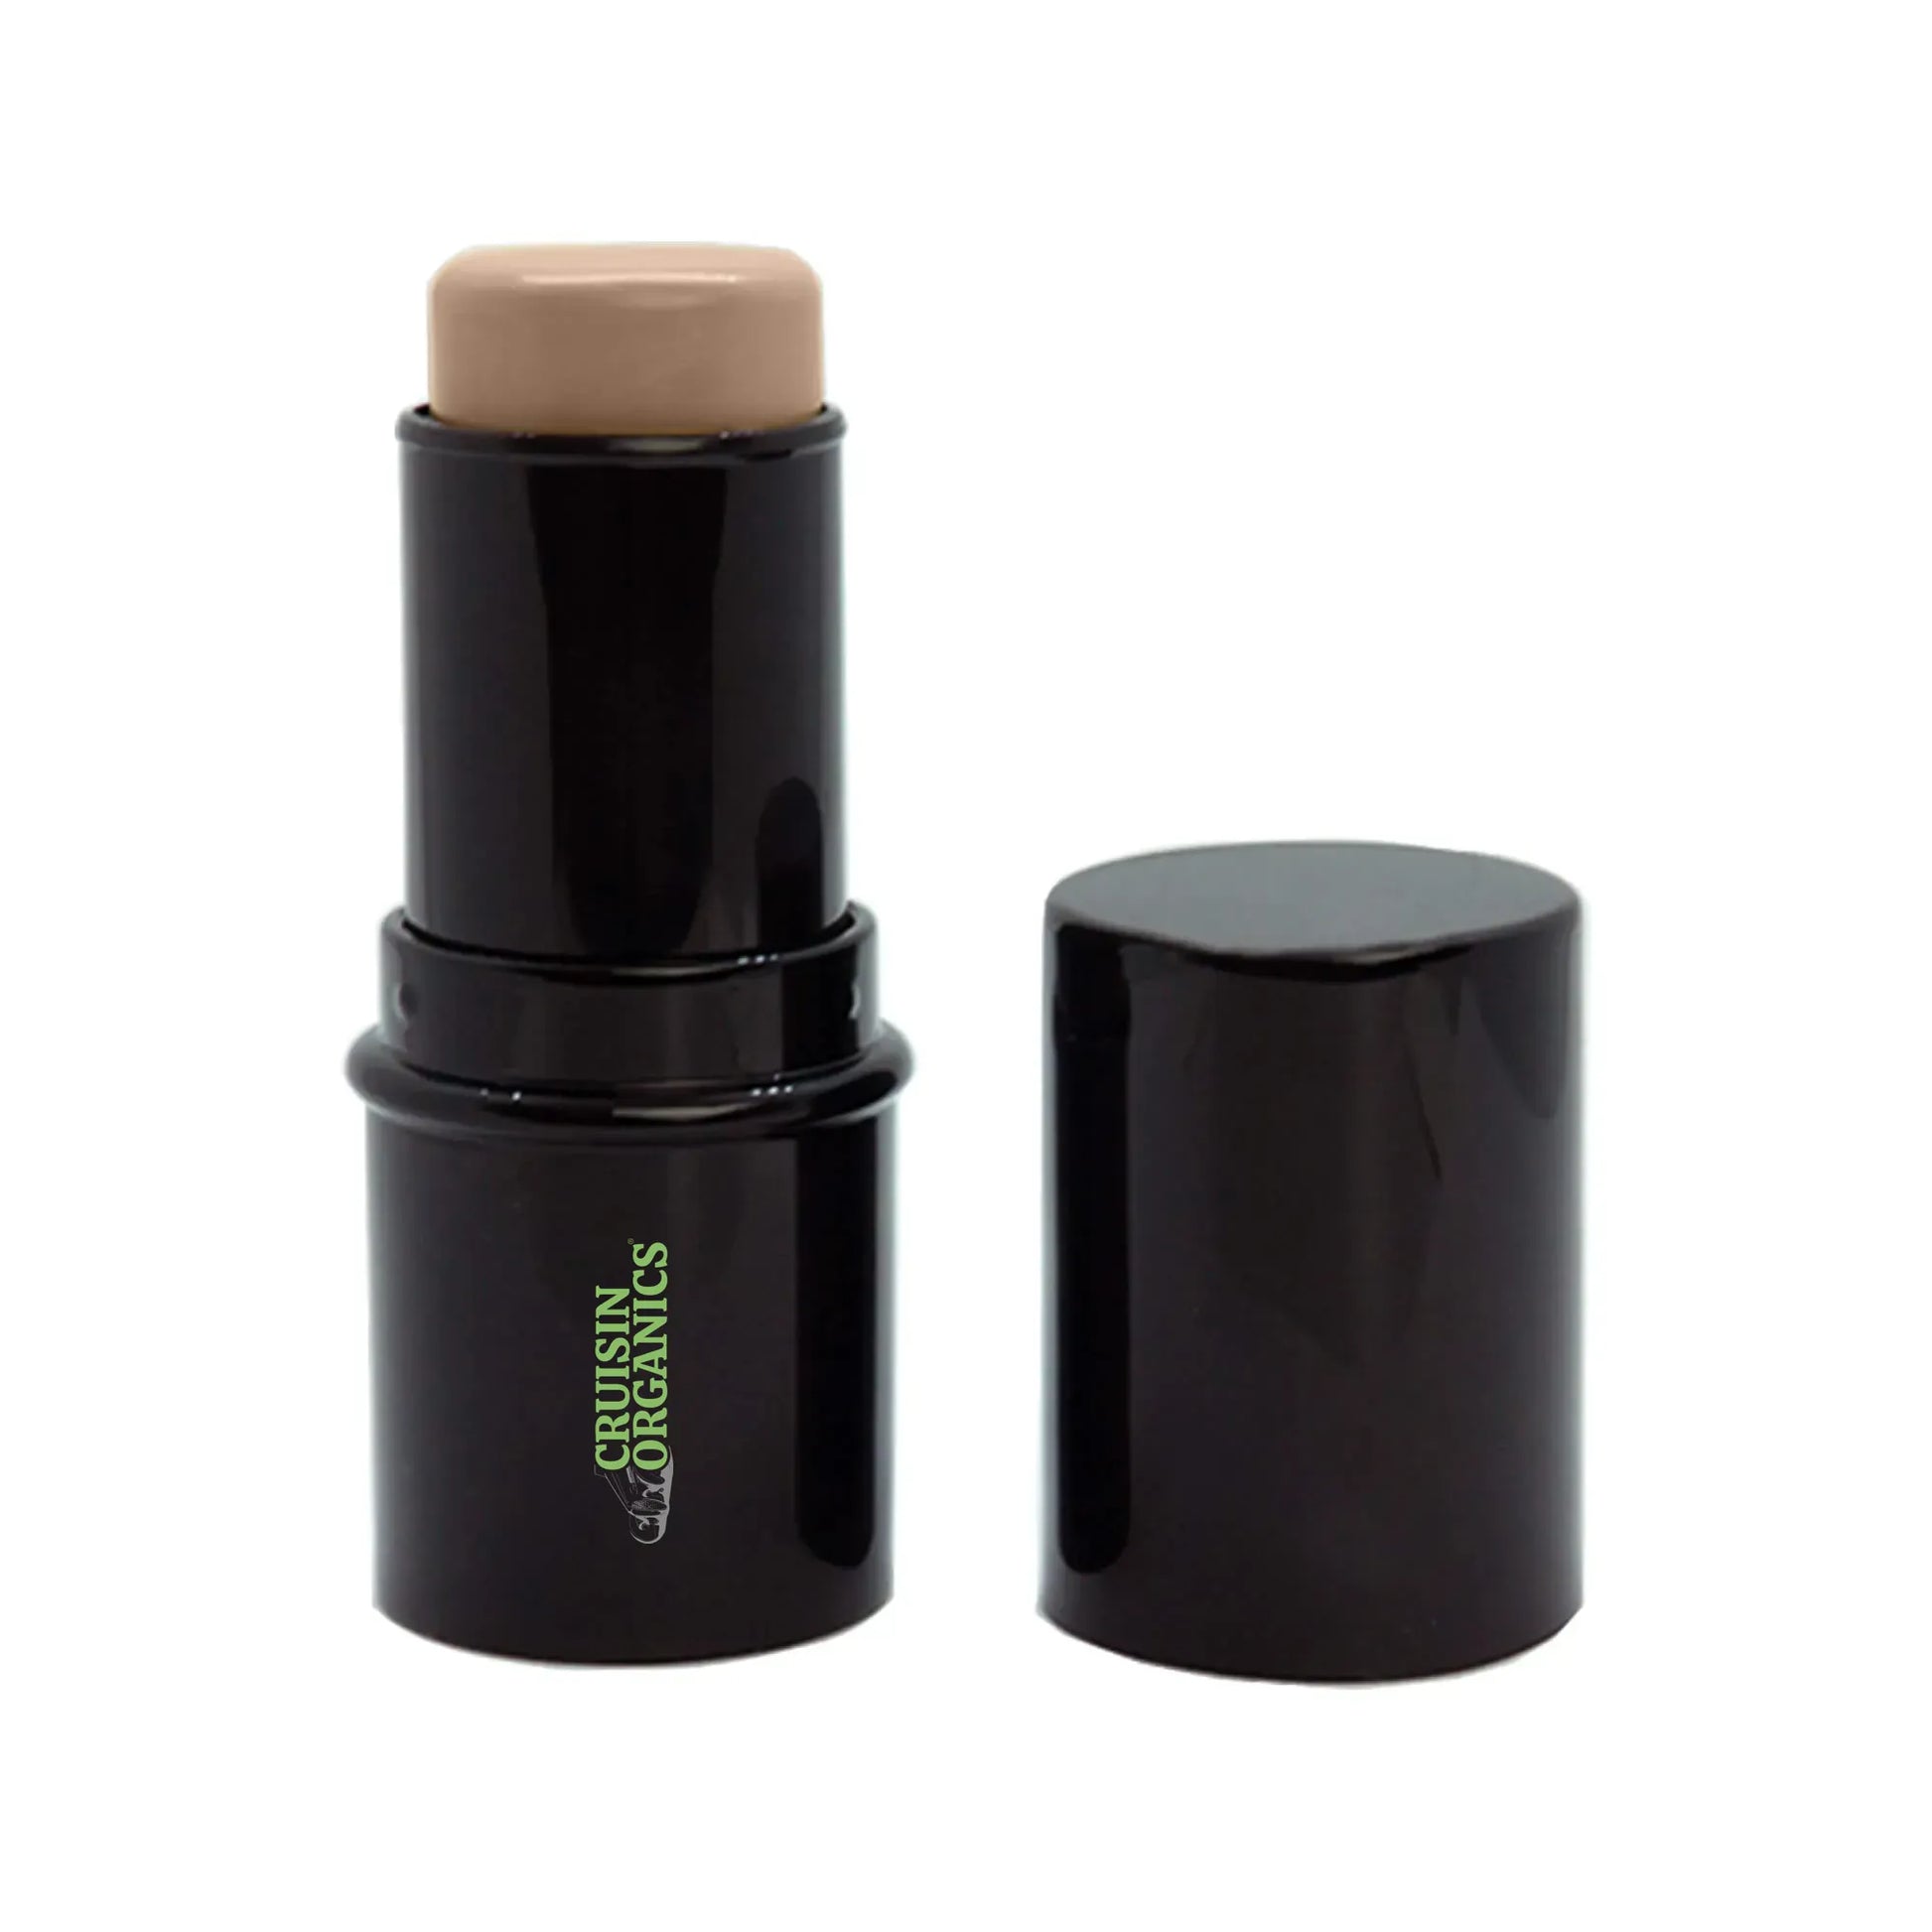 Correct imperfections with this easy-to-use, compact concealer stick. Provides medium to full coverage with a matte finish. You can also use darker shades for contouring and lighter shades for highlighting.